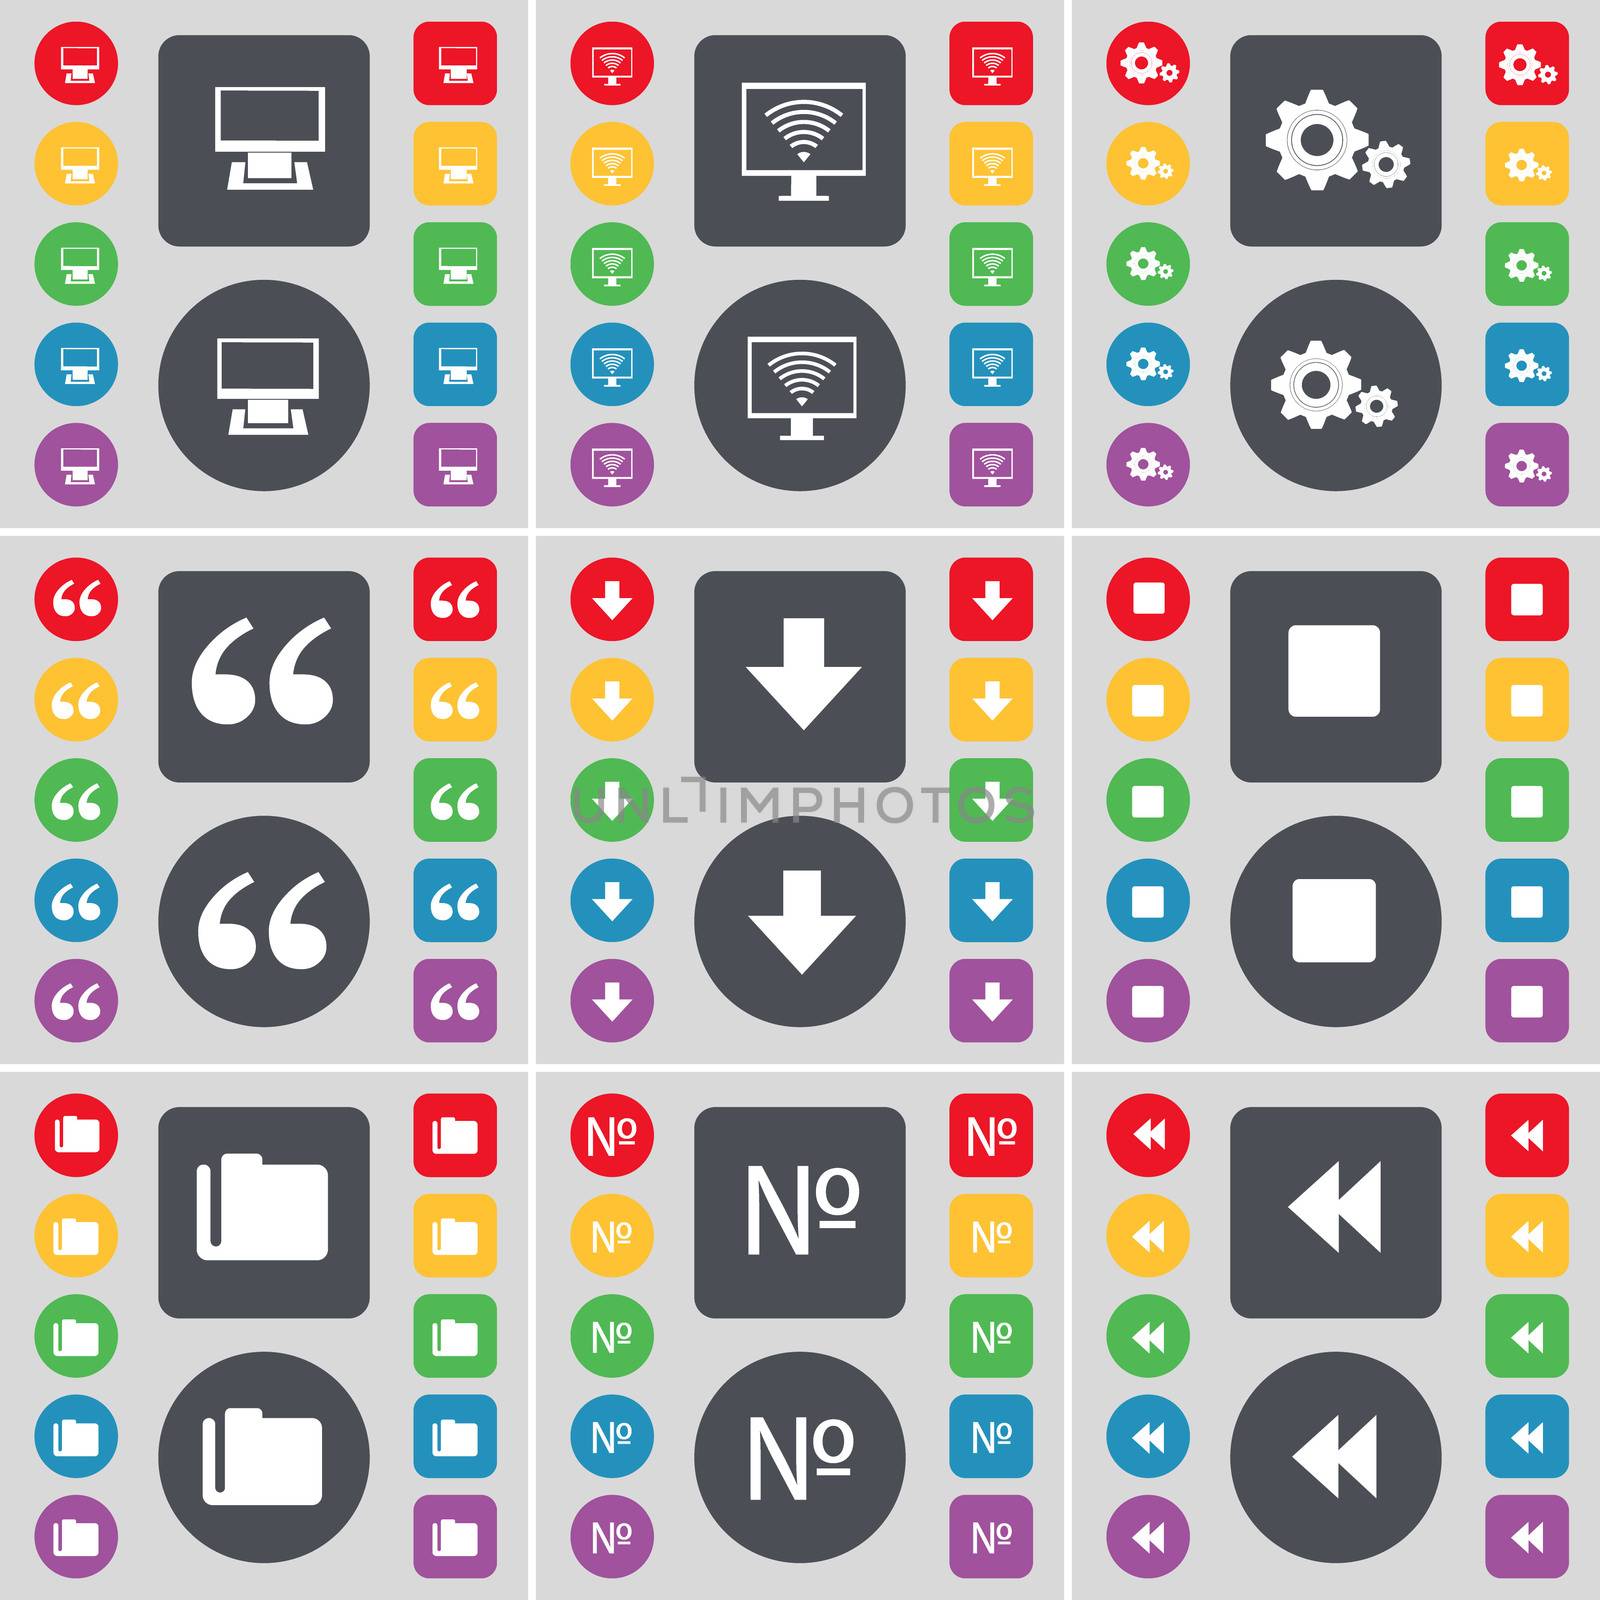 Monitor, Gear, Quotation mark, Arrow down, Media stop, Folder, Number, Rewind icon symbol. A large set of flat, colored buttons for your design. illustration